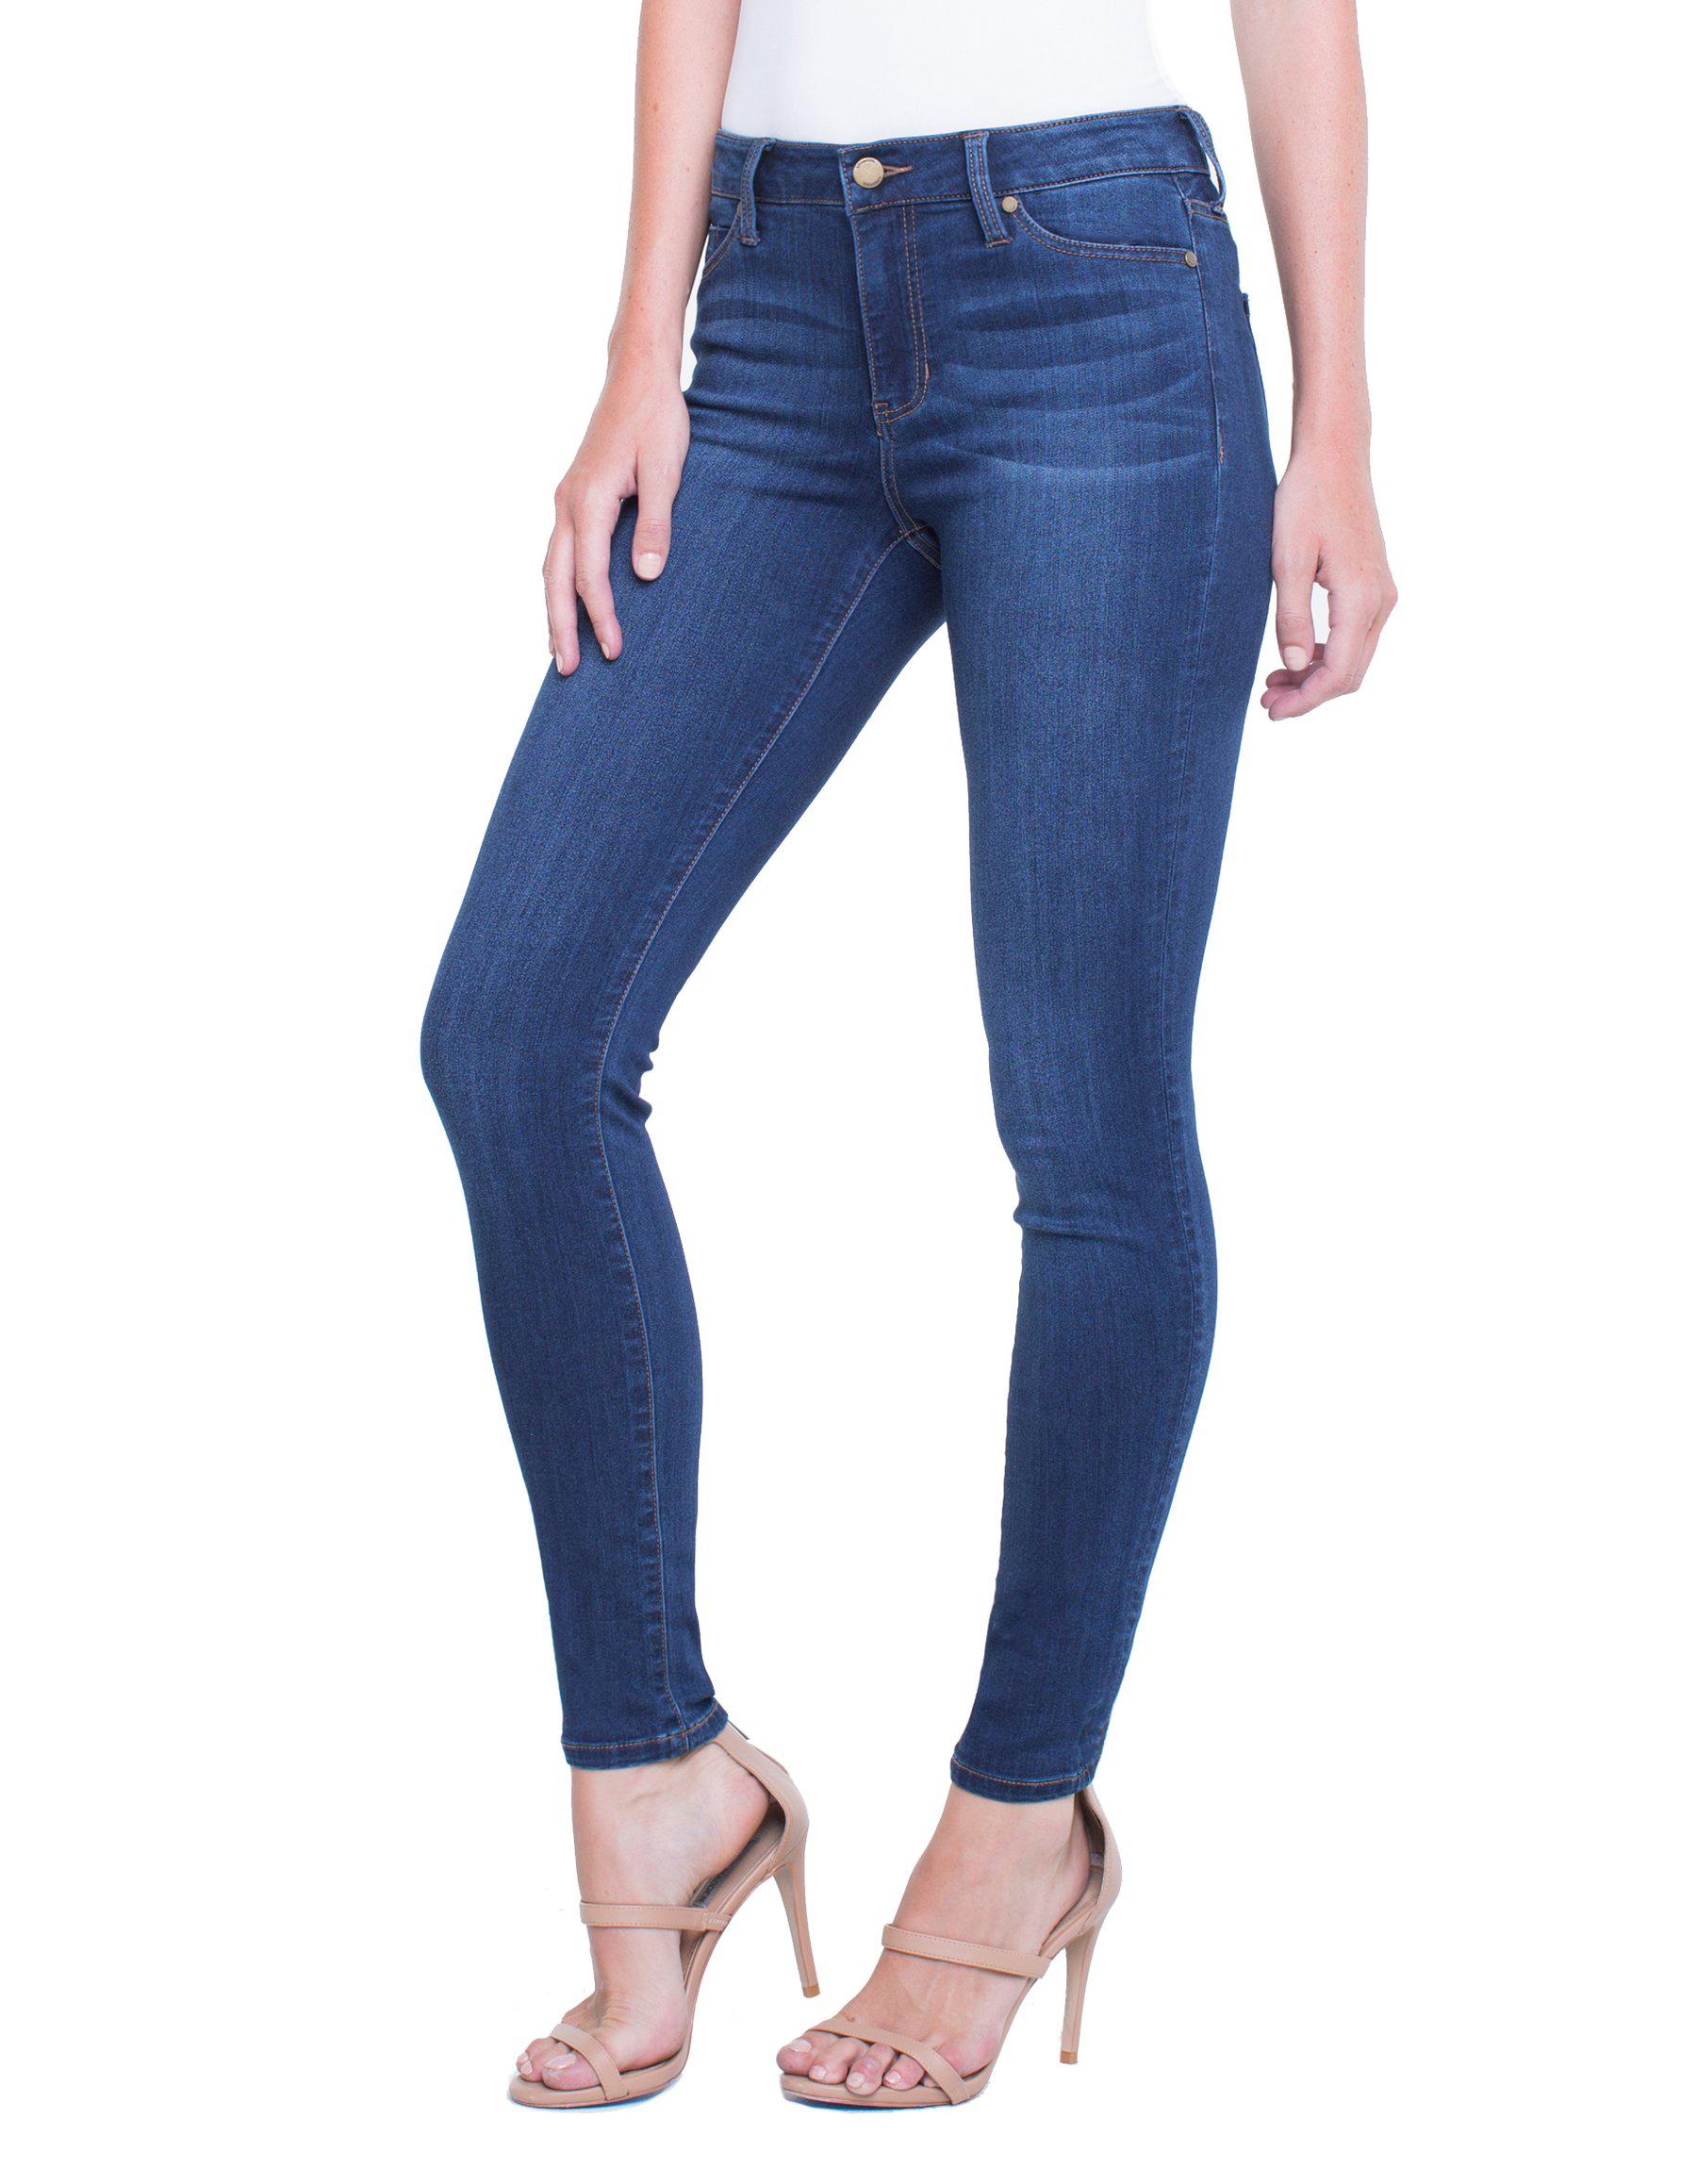 Lyst - Liverpool Jeans Company Petite Abby Skinny Silky Soft in Blue